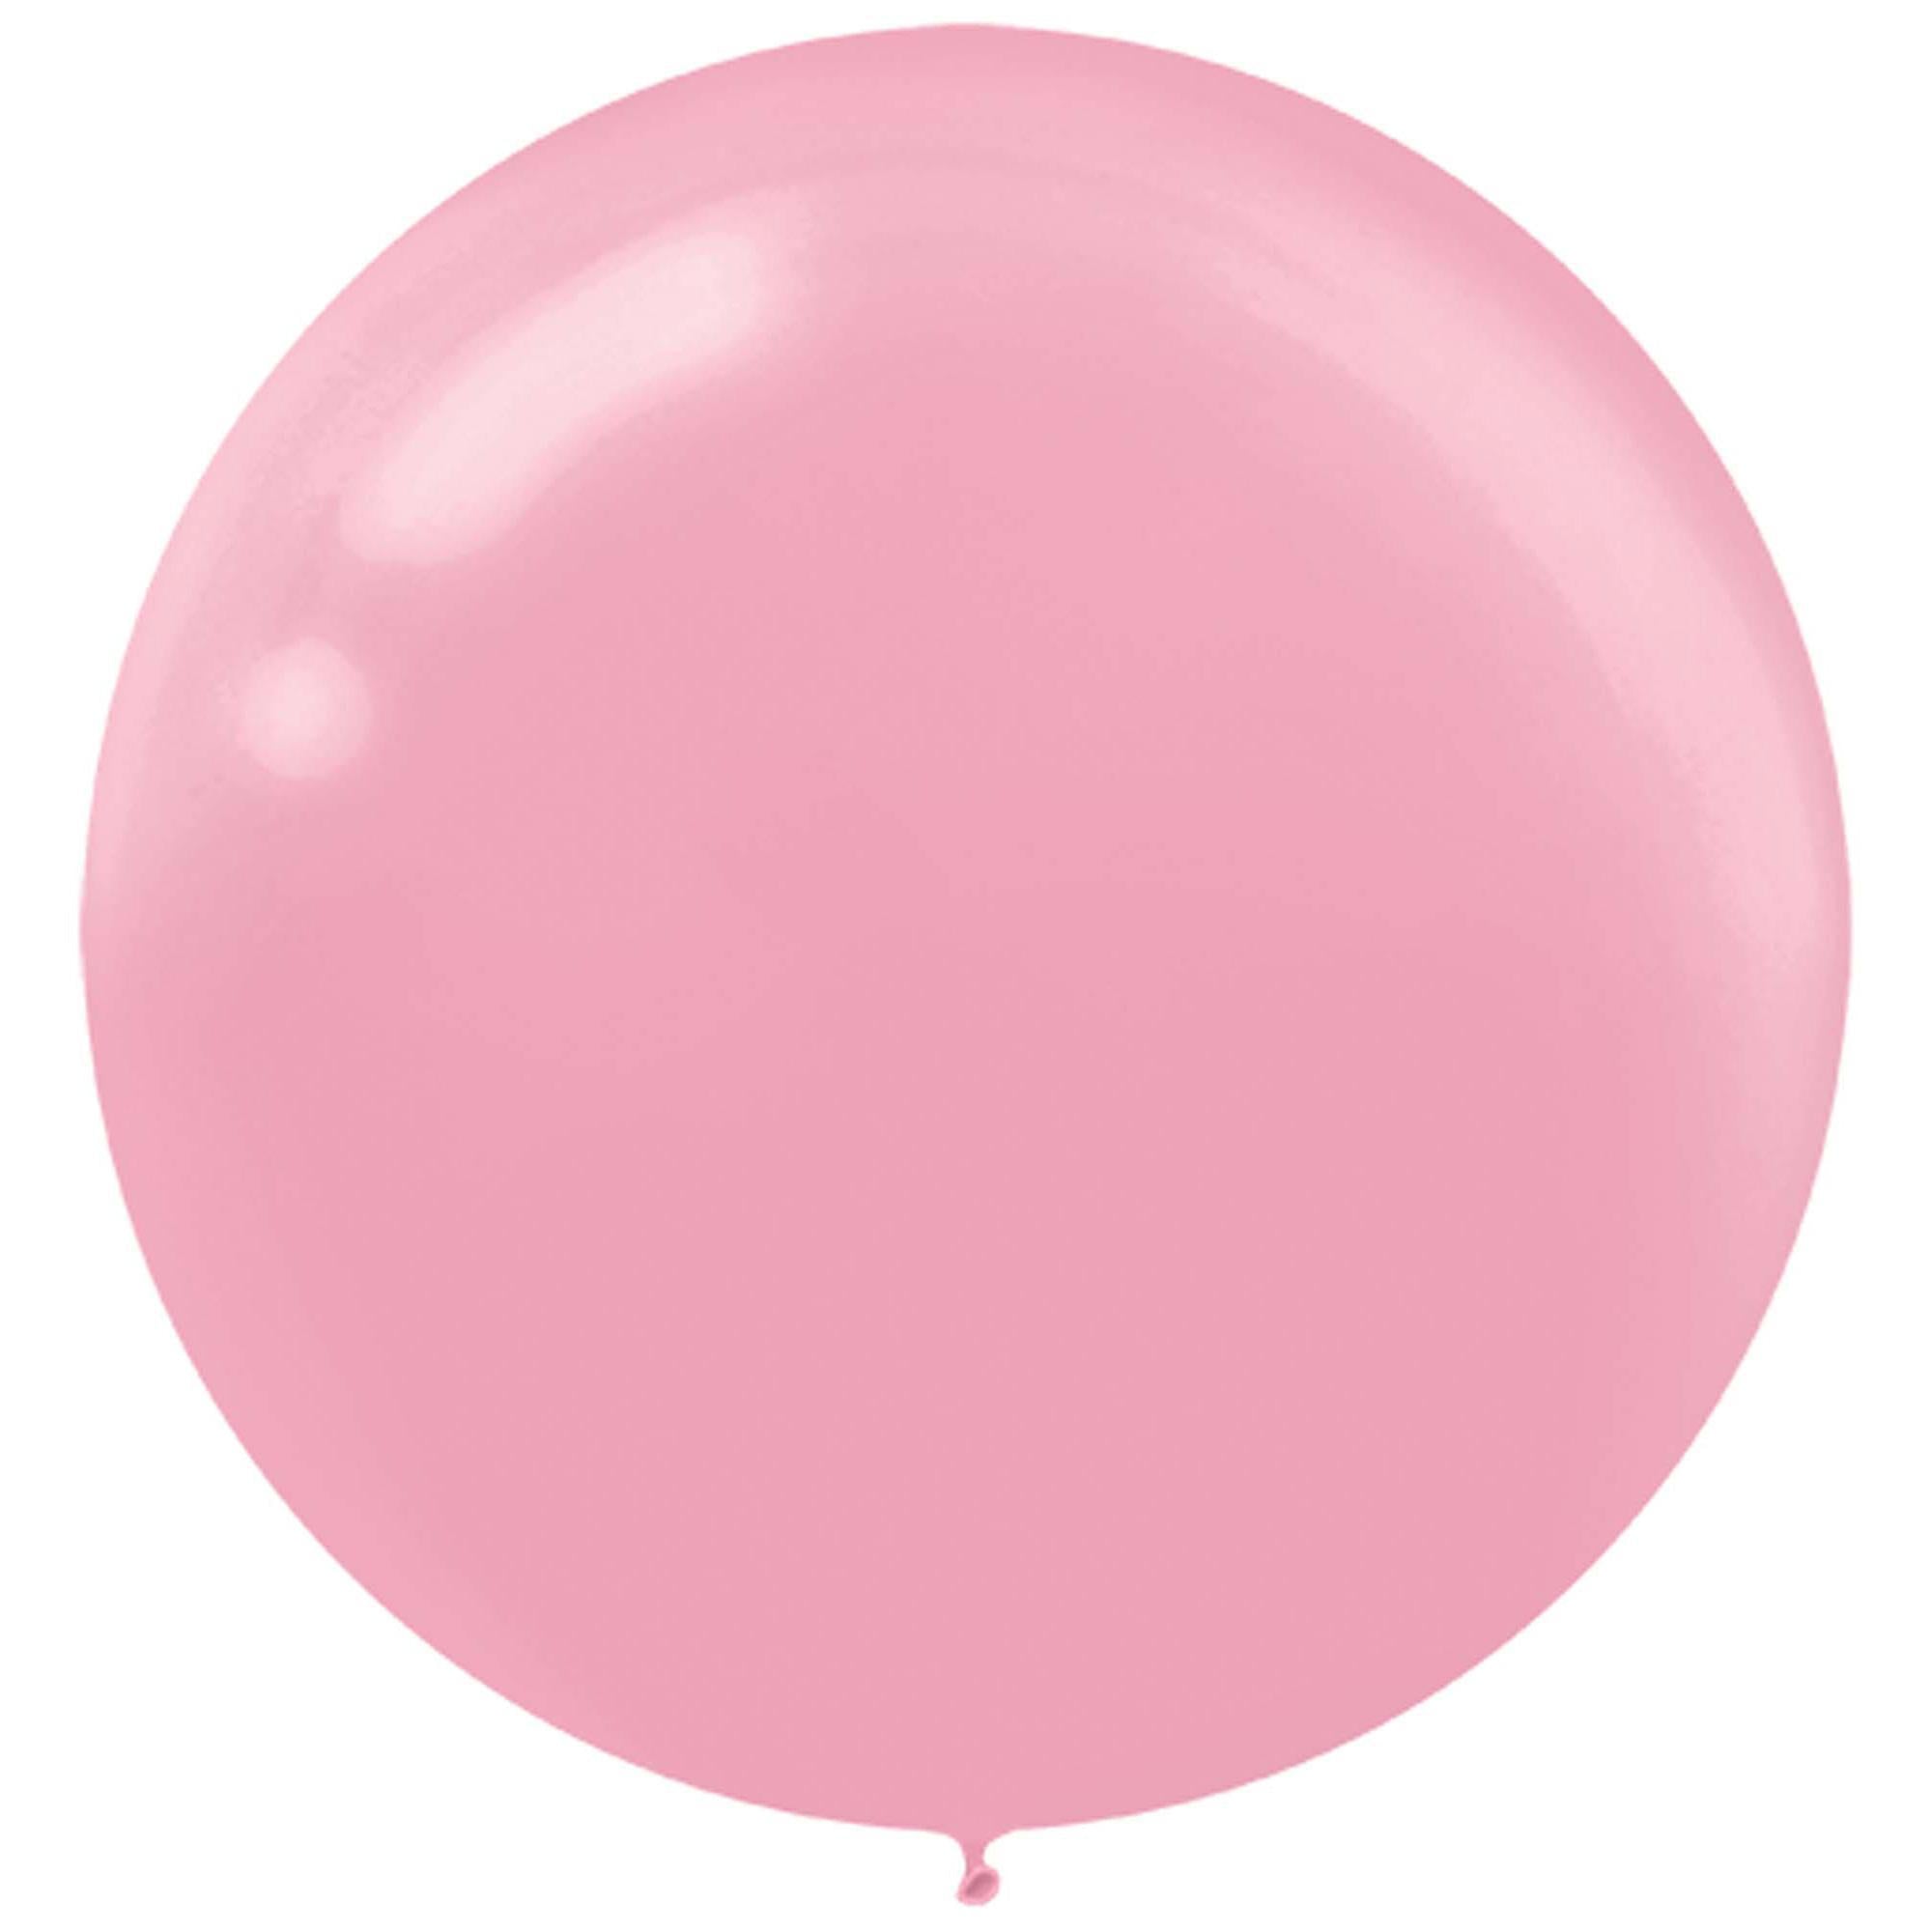 New Pink Latex Balloon 24in, 4pcs Balloons & Streamers - Party Centre